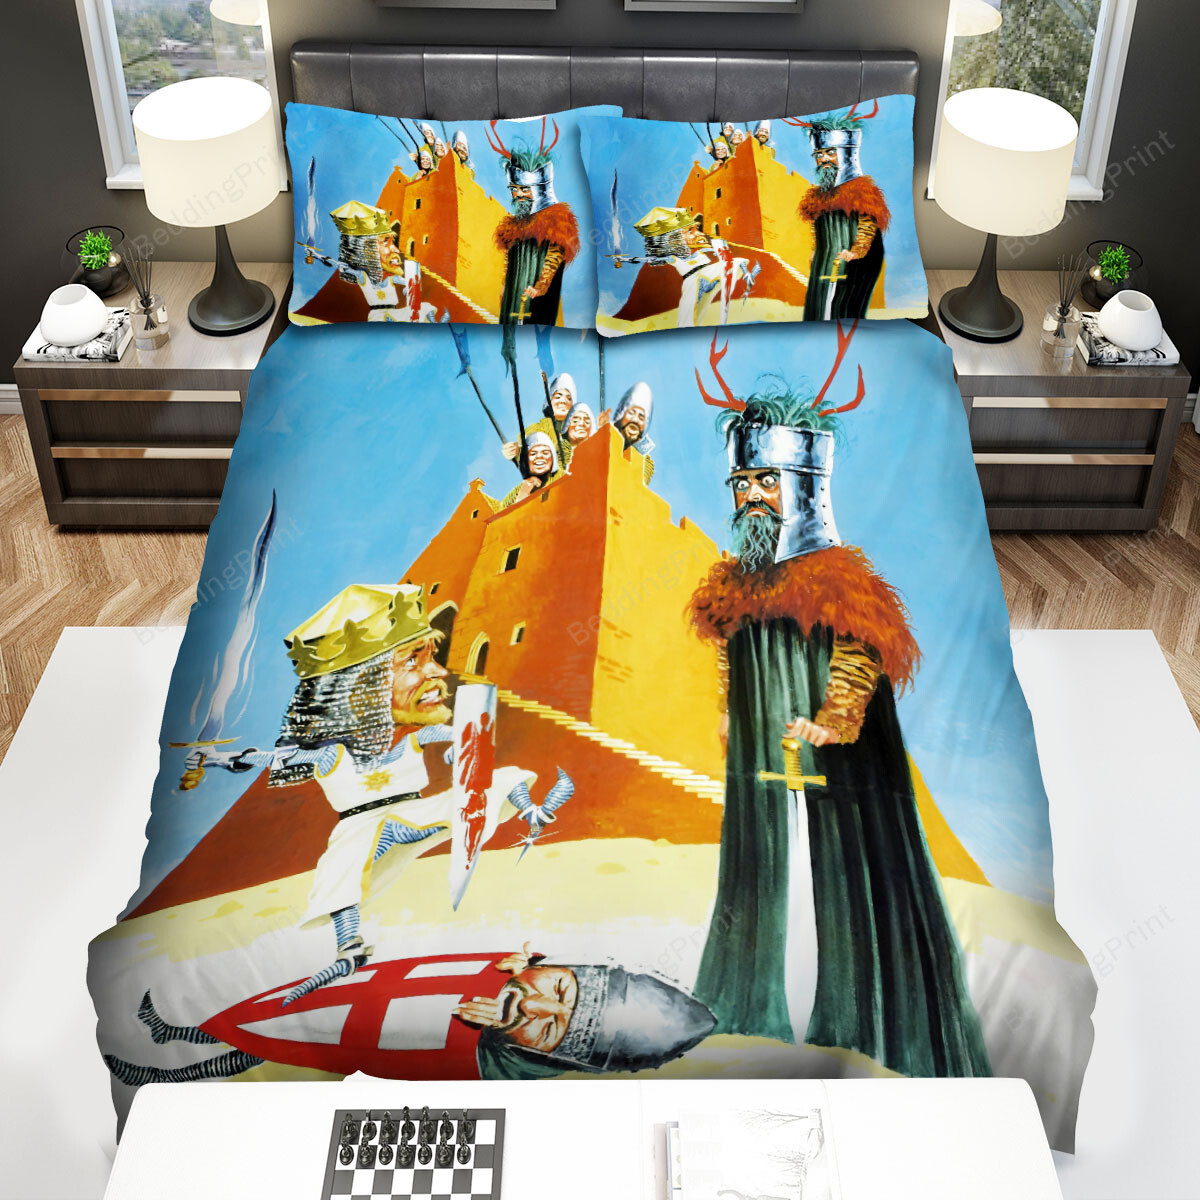 Monty Python And The Holy Grail Movie Poster 3 Bed Sheets Spread Comforter Duvet Cover Bedding Sets